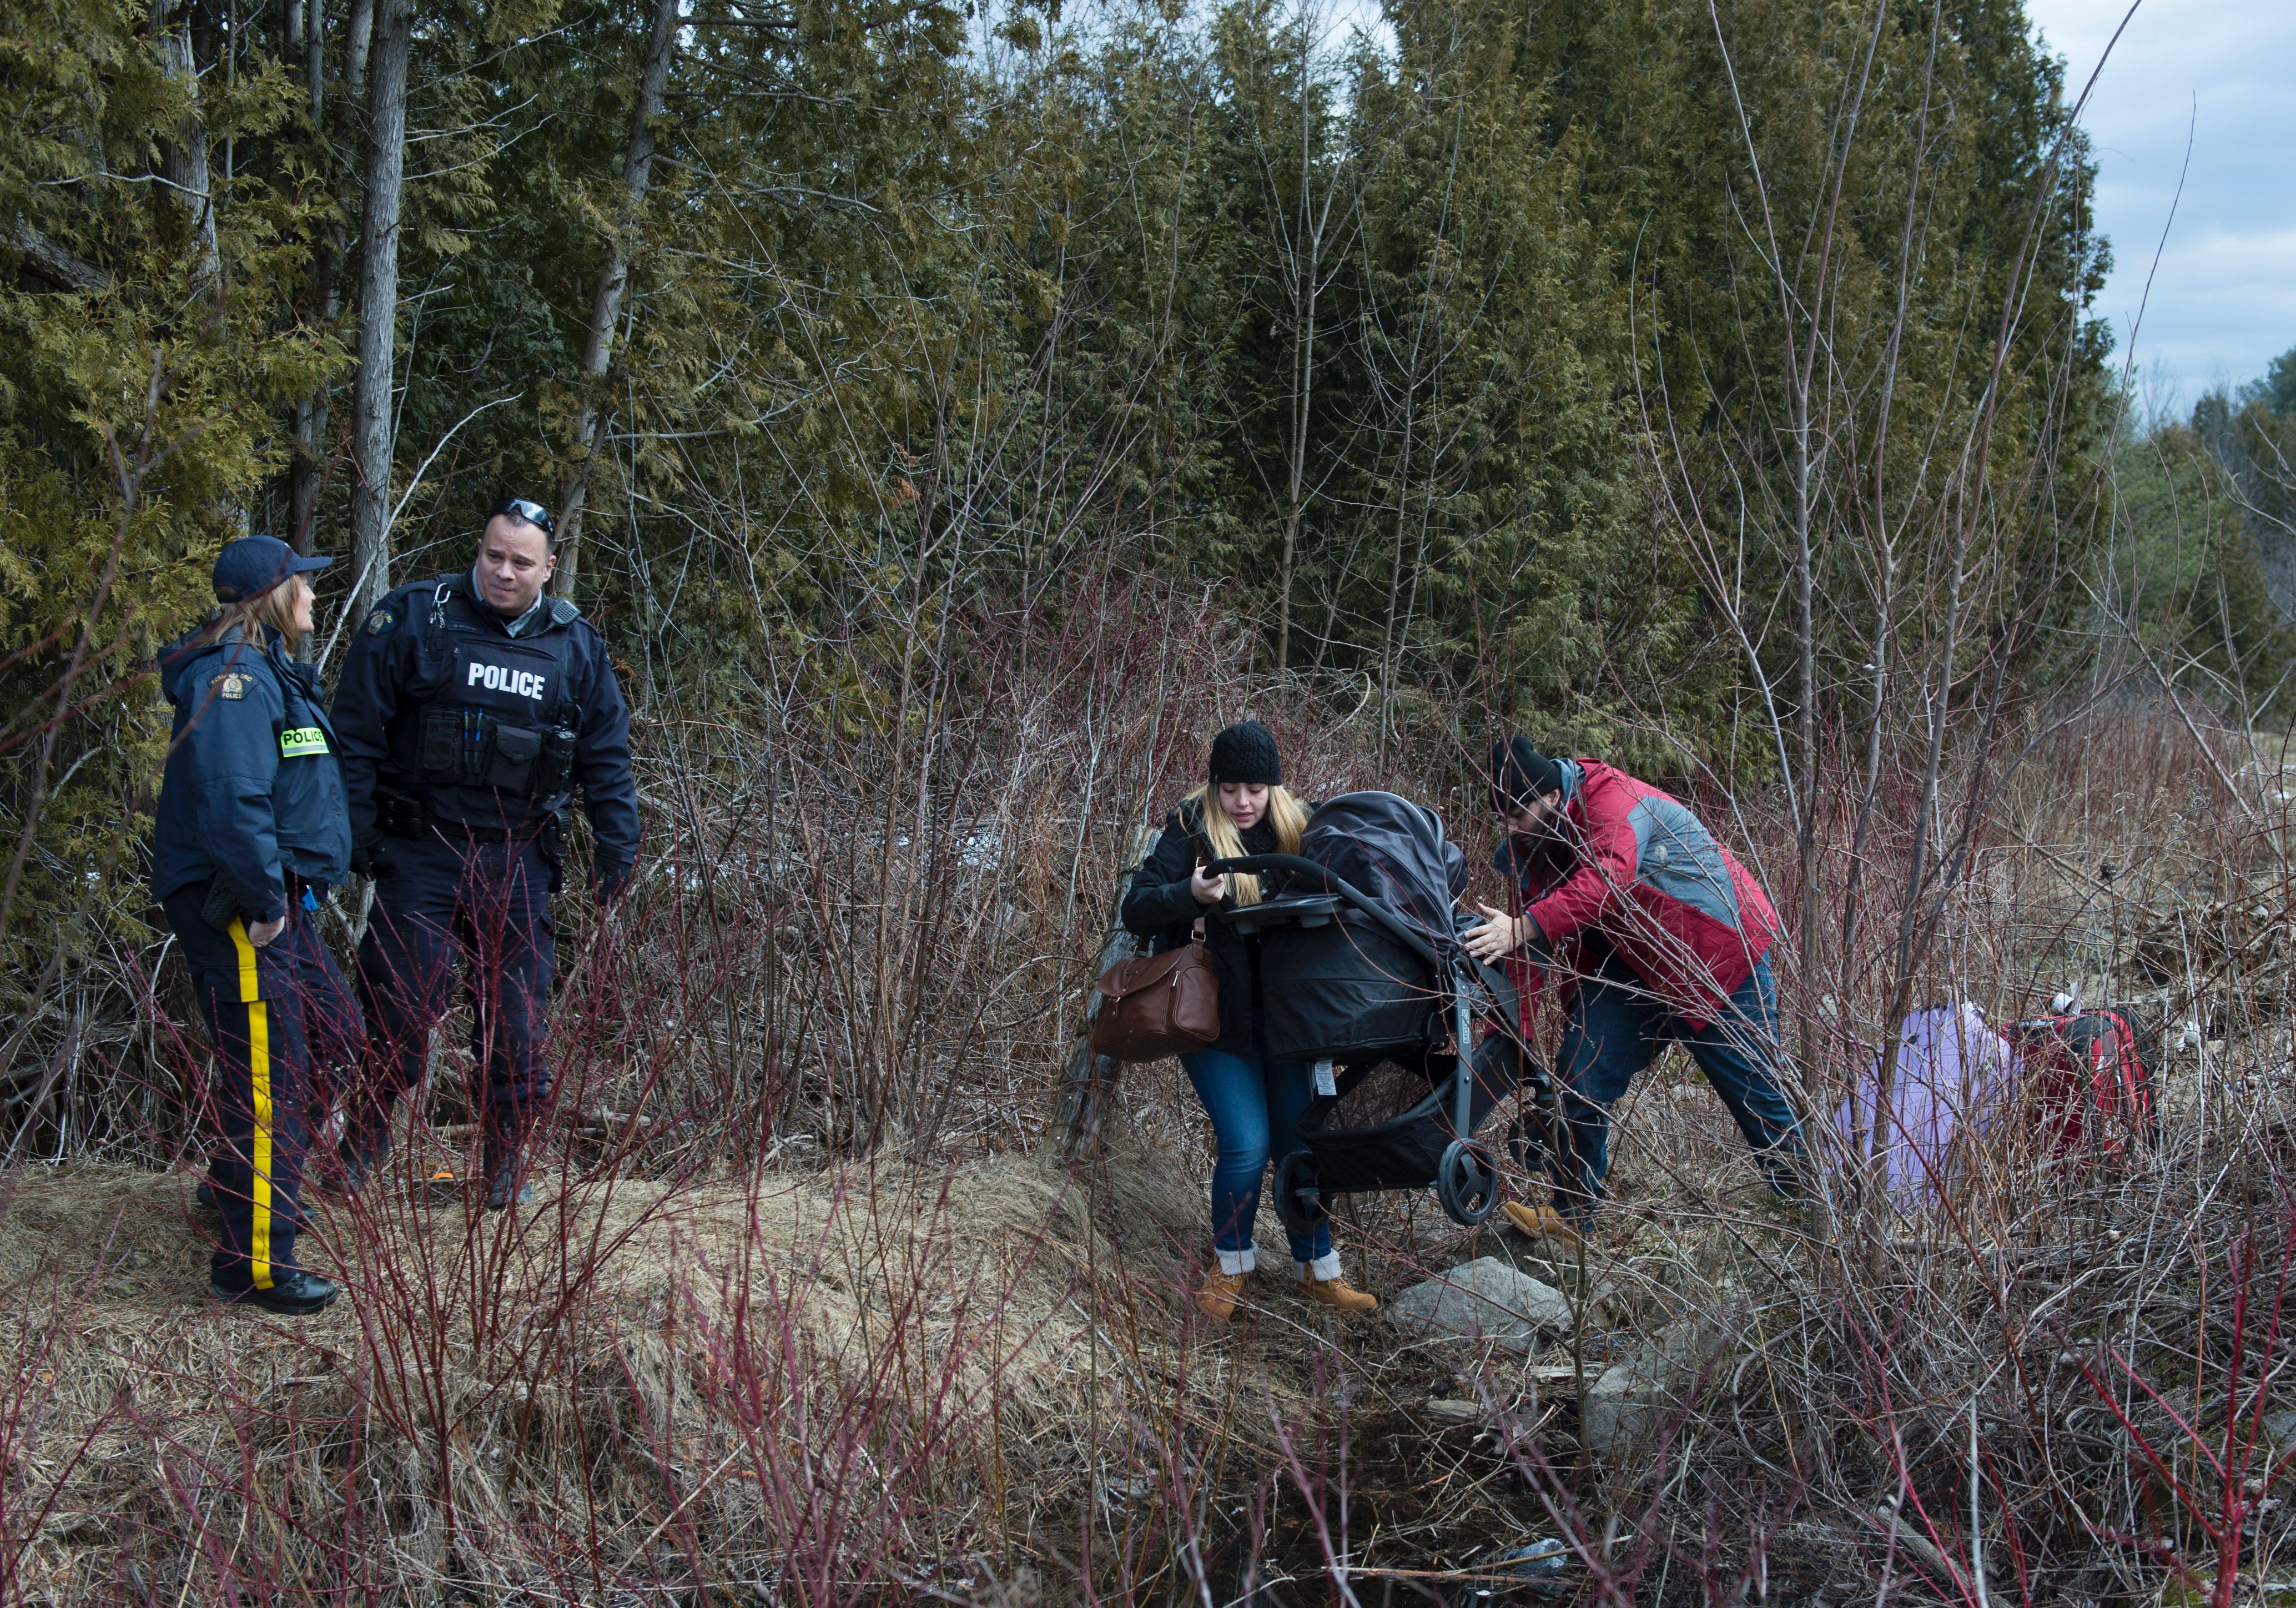 A couple who claimed to be from Turkey struggles to get their baby and baby carriage across the US/Canada border February 27, 2017, in Champlain, New York. 
                      There continues to be an increasing number of people crossing the US border into Canada illegally. (DON EMMERT—AFP/Getty Images)